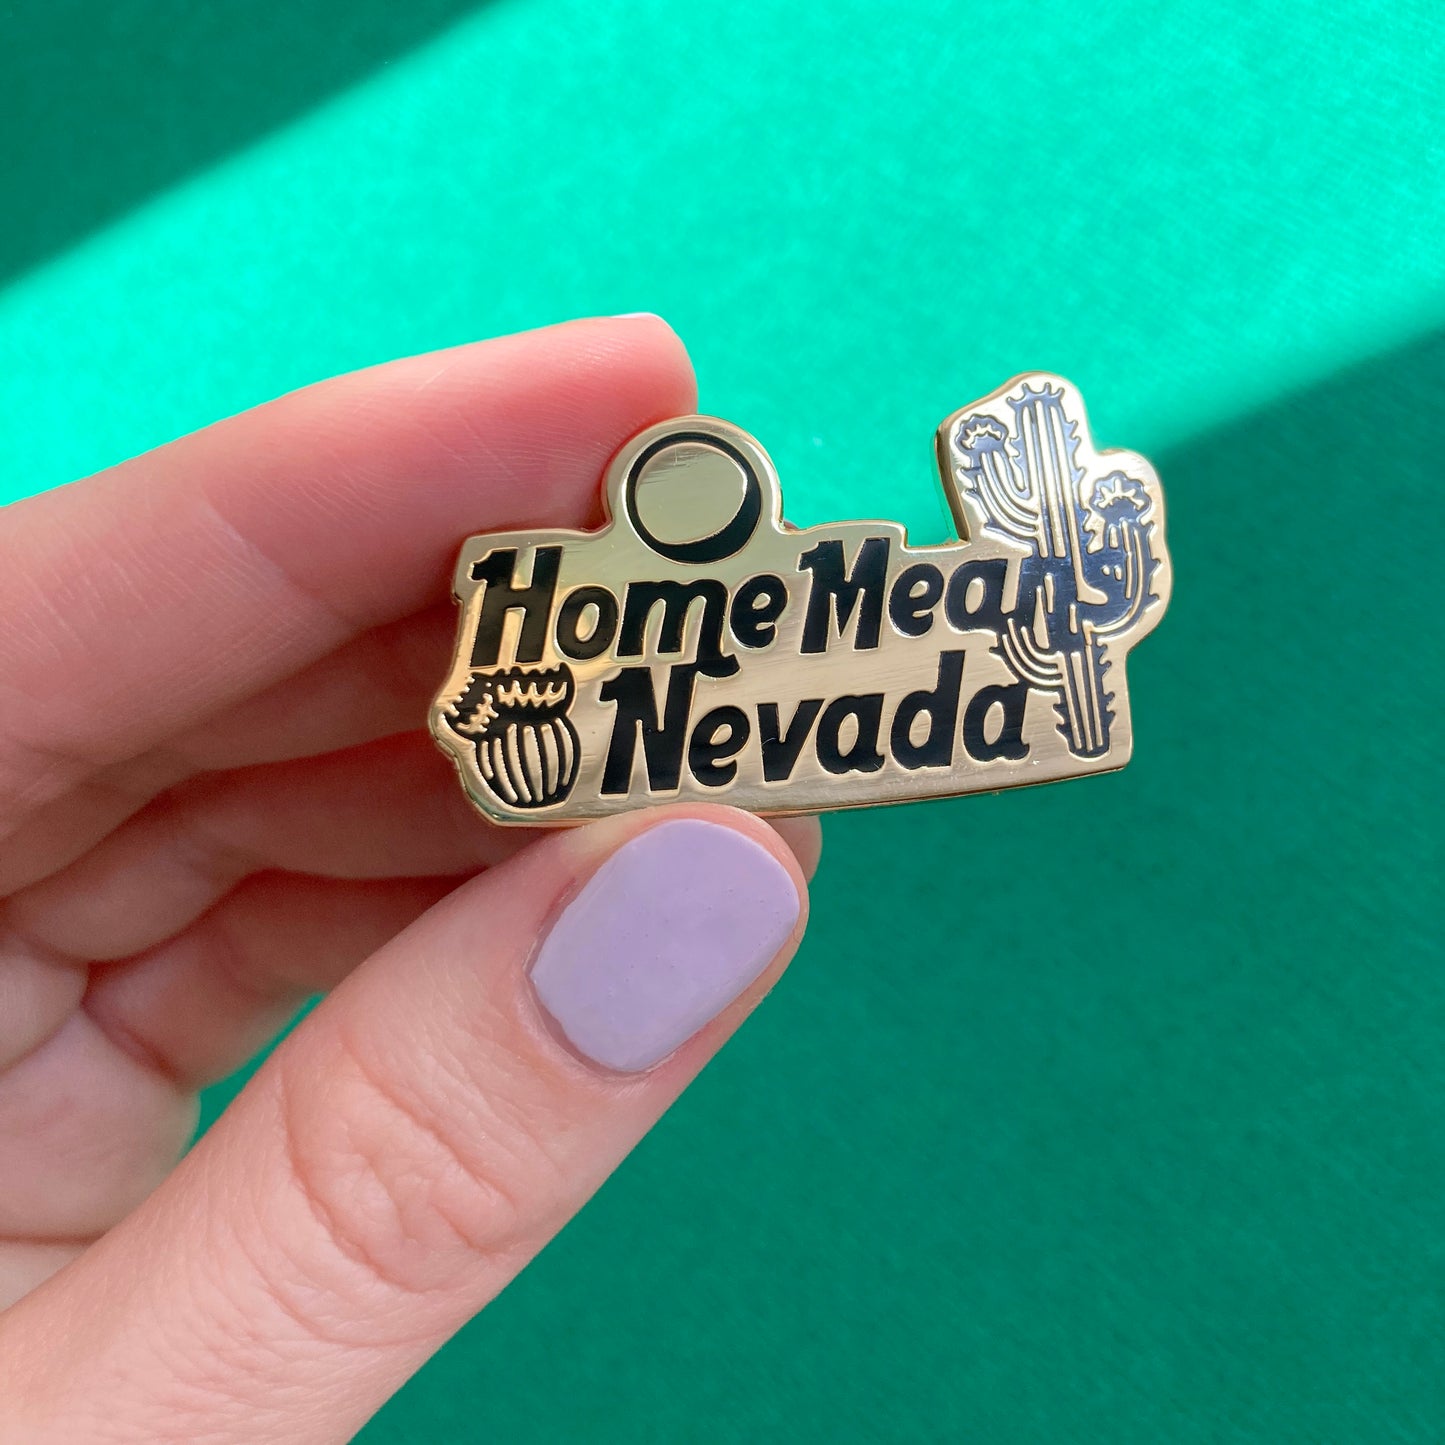 Home Means Nevada Pin